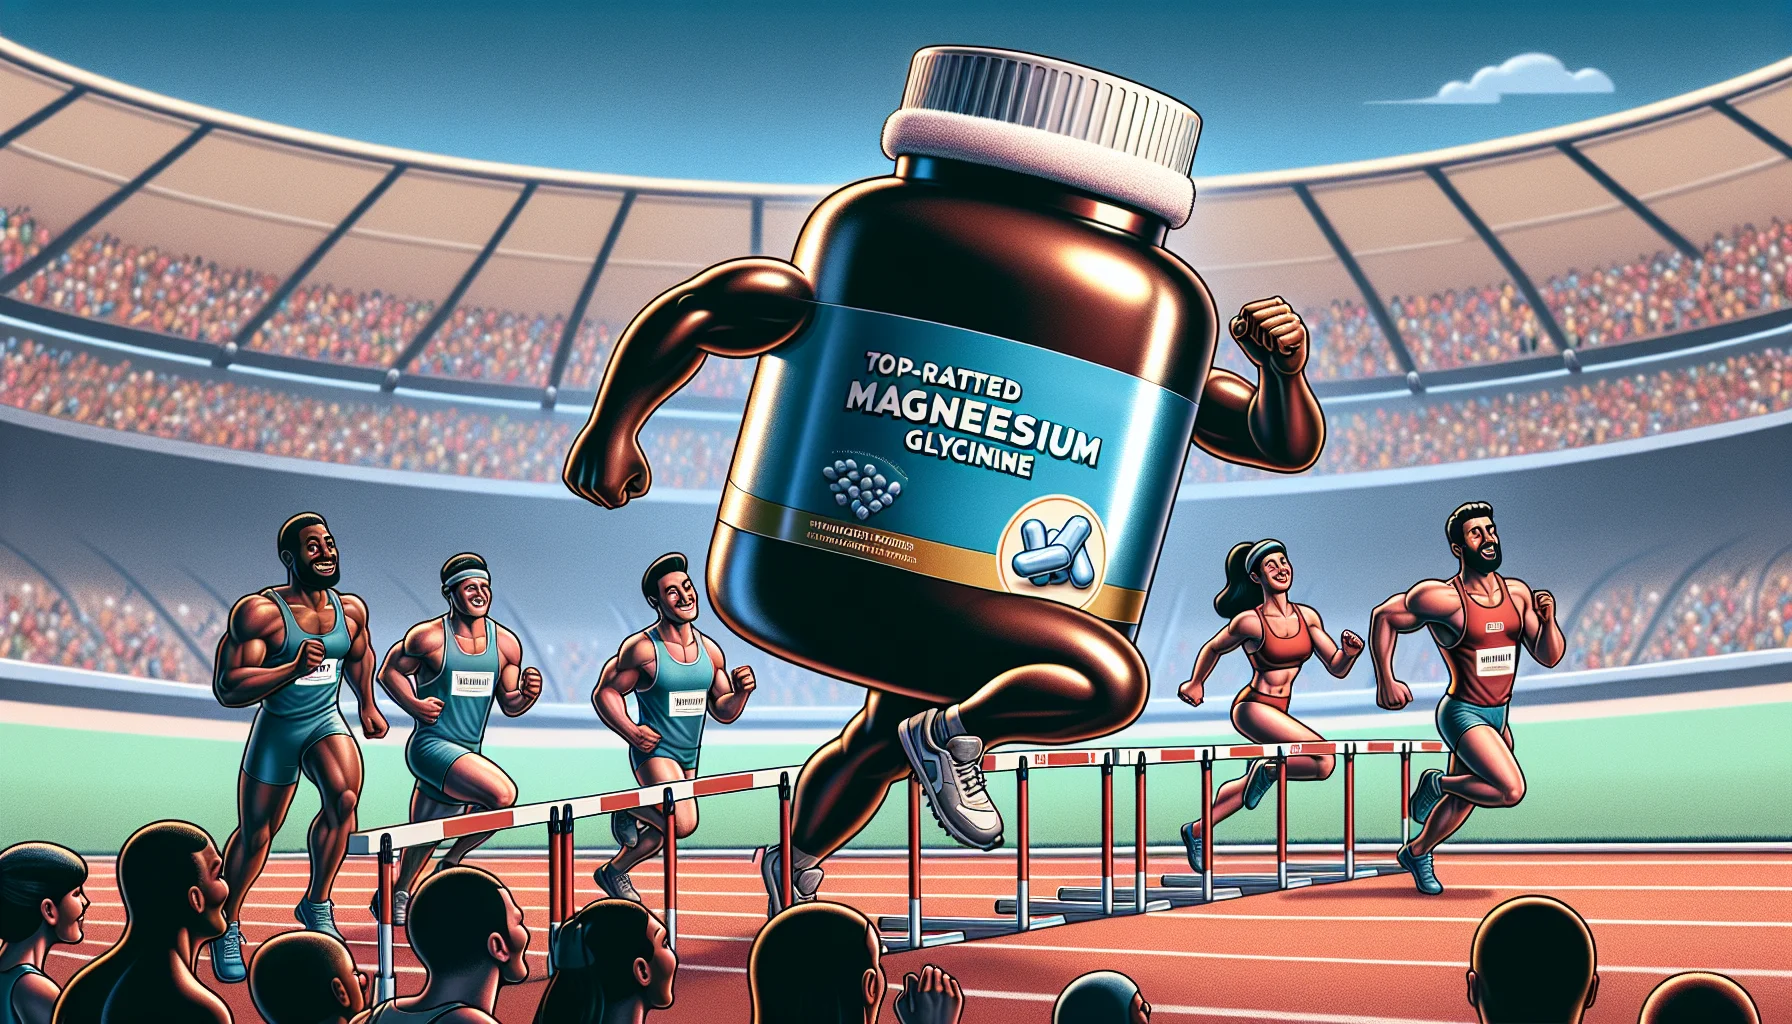 Create a whimsical scene where a large, glossy bottle labeled as 'Top-Rated Magnesium Glycinate' is participating in a track and field event. It's depicted wearing a sweatband around its 'cap' and running shoes on its base, clearing the hurdles with great ease alongside other supplement bottles trying to keep up. The cheering crowd in the backdrop is composed of athletes of different descents; Hispanic female sprinter, Caucasian male weightlifter, Middle-Eastern female gymnast, and a South Asian male swimmer, all watching in awe and surprise.